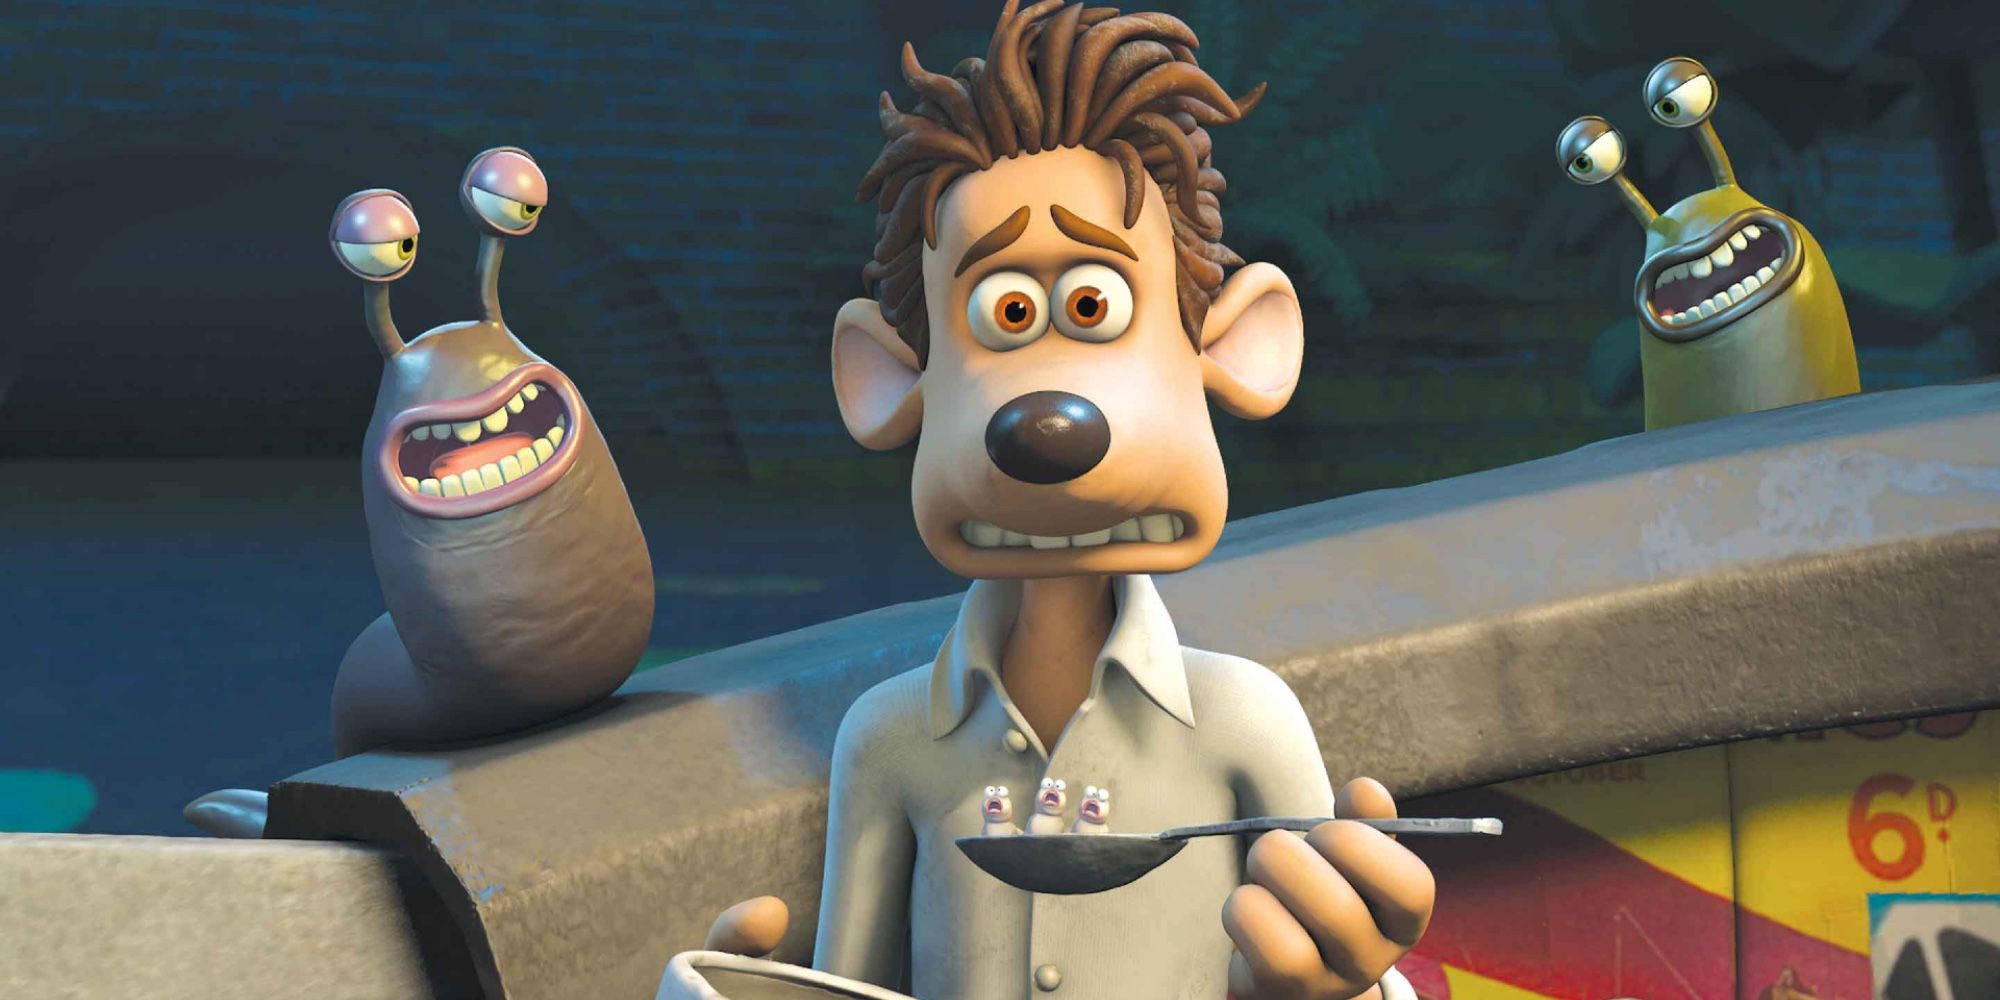 Roddy looking worried while surrounded by smiling slugs in Flushed Away.